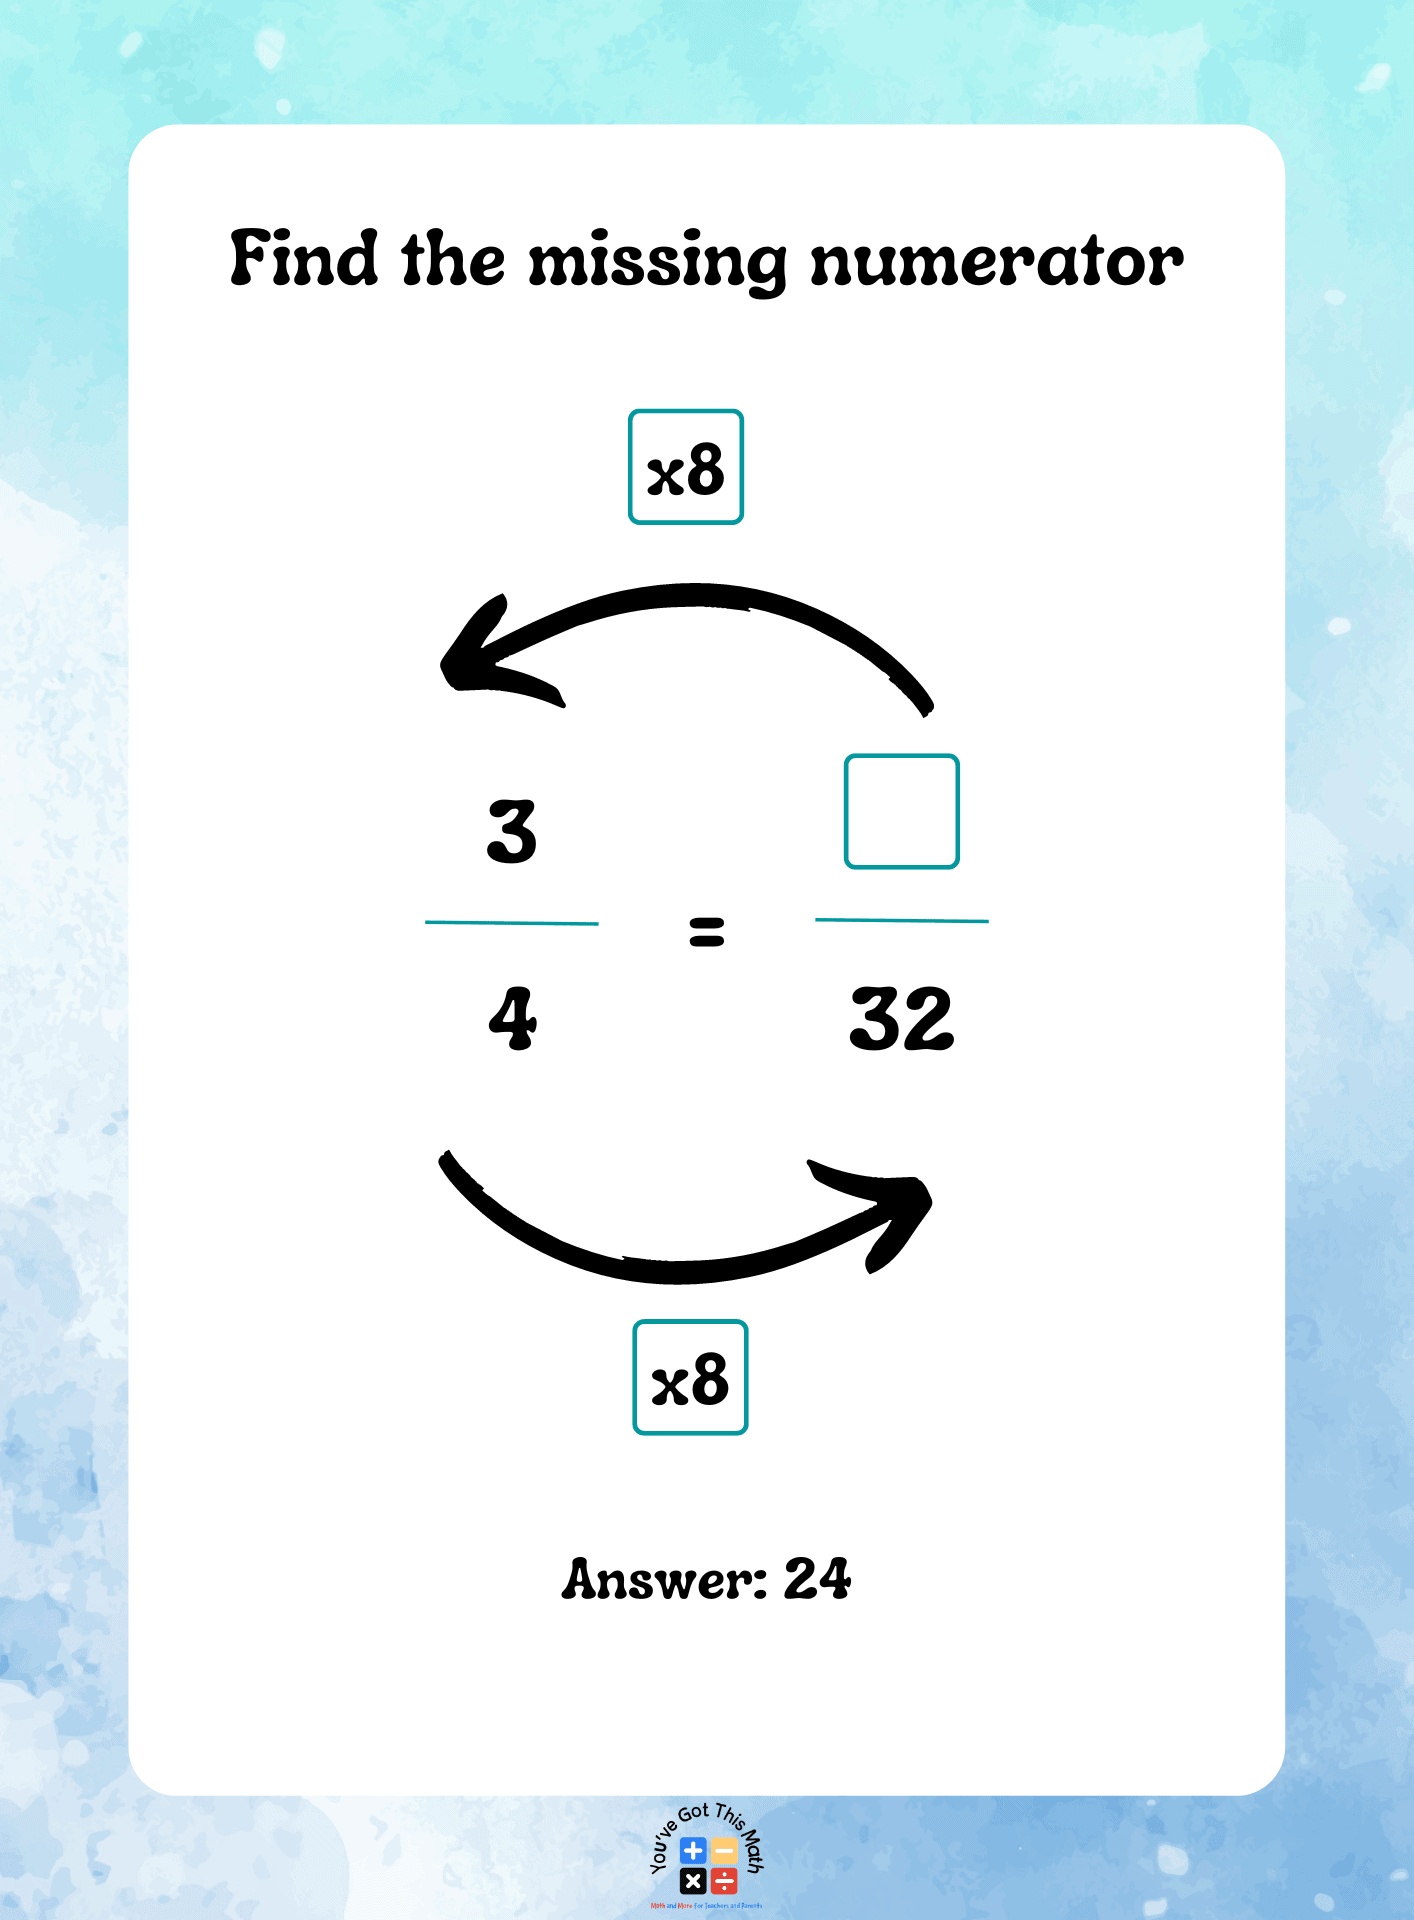 How to Find Missing Numerator of a Fraction